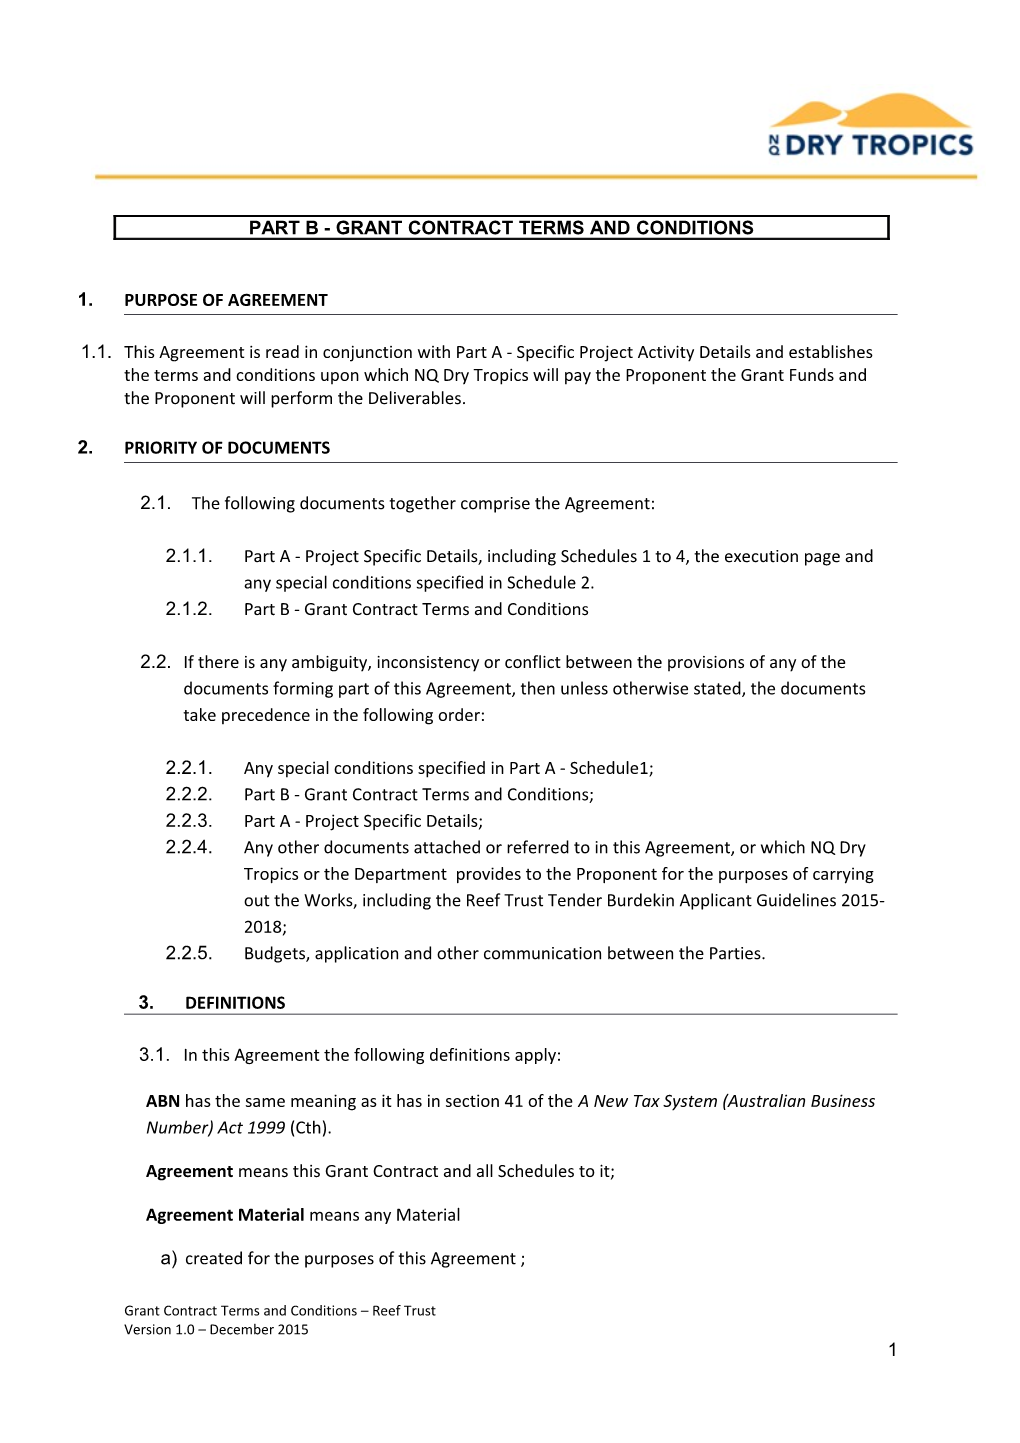 Grant Contract - Part B: Grant Contract Terms and Conditions